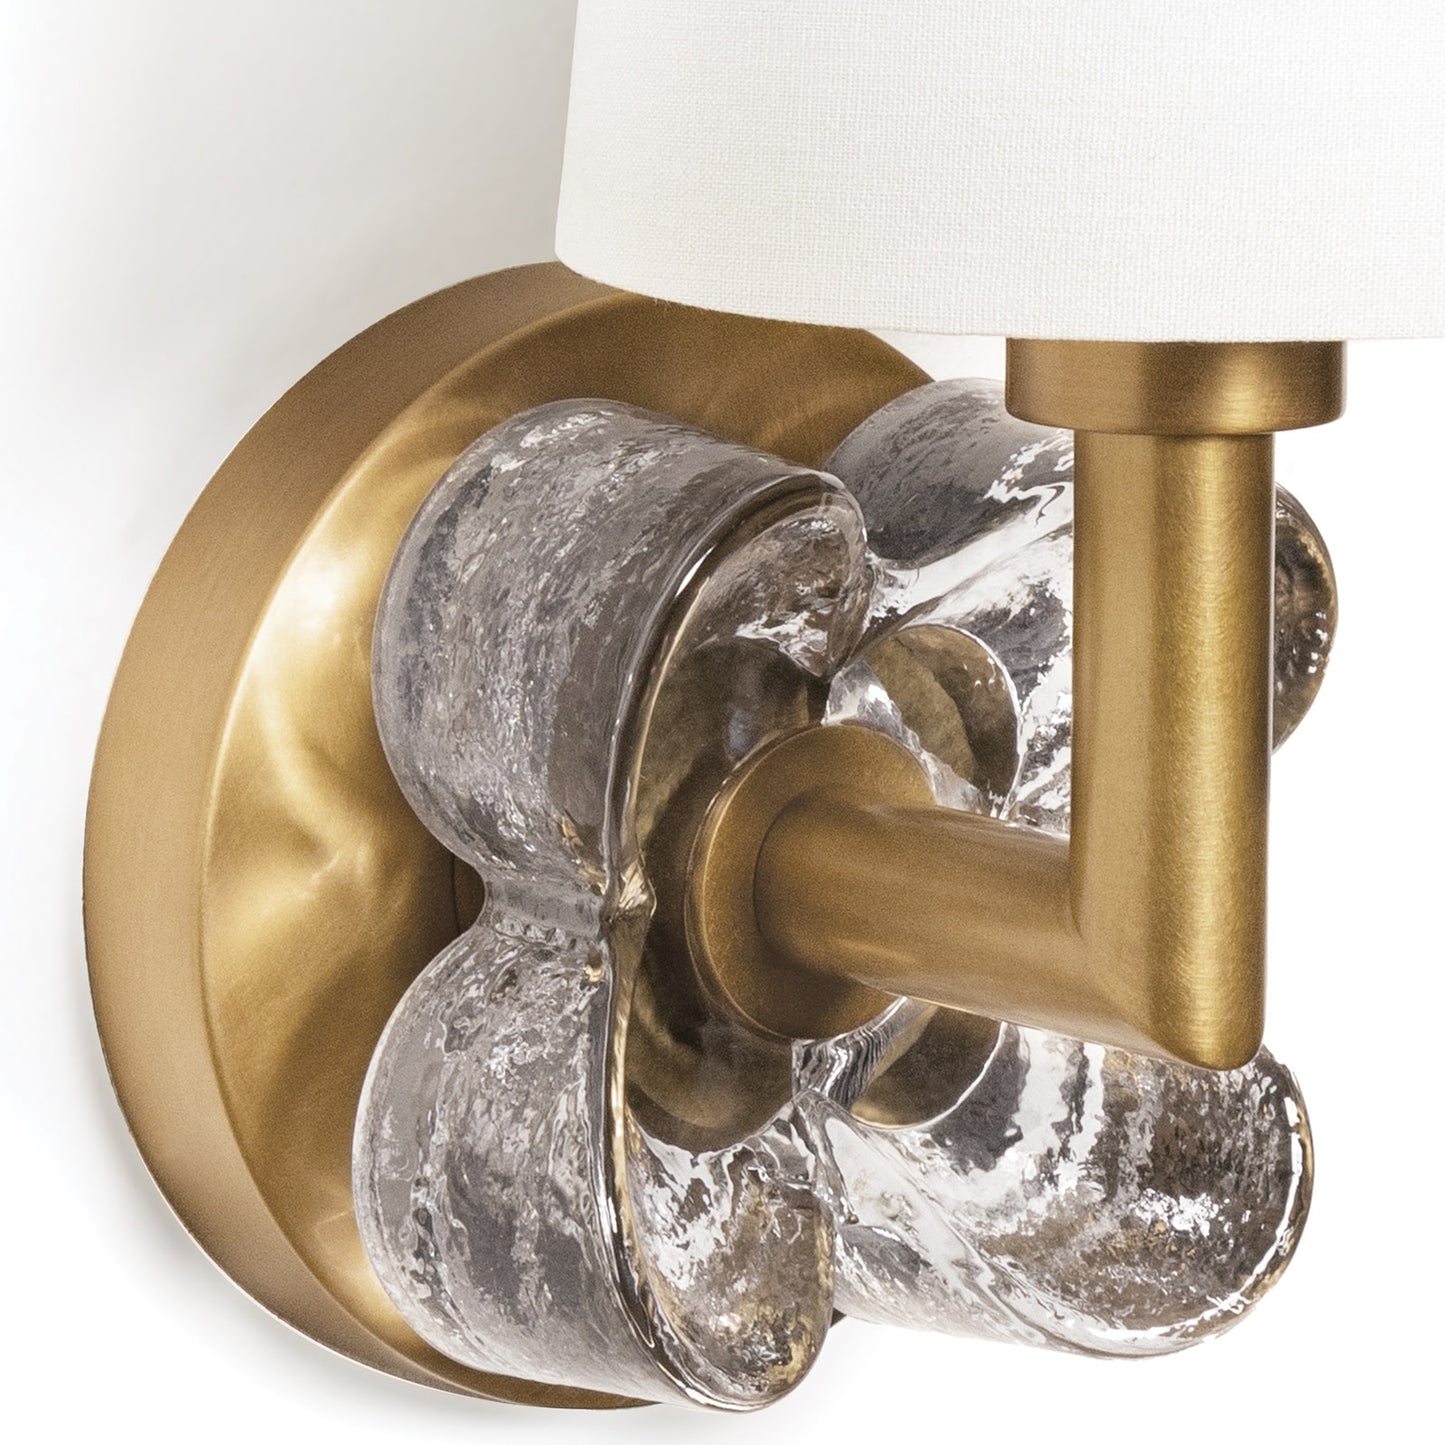 Bella Sconce in Natural Brass by Southern Living